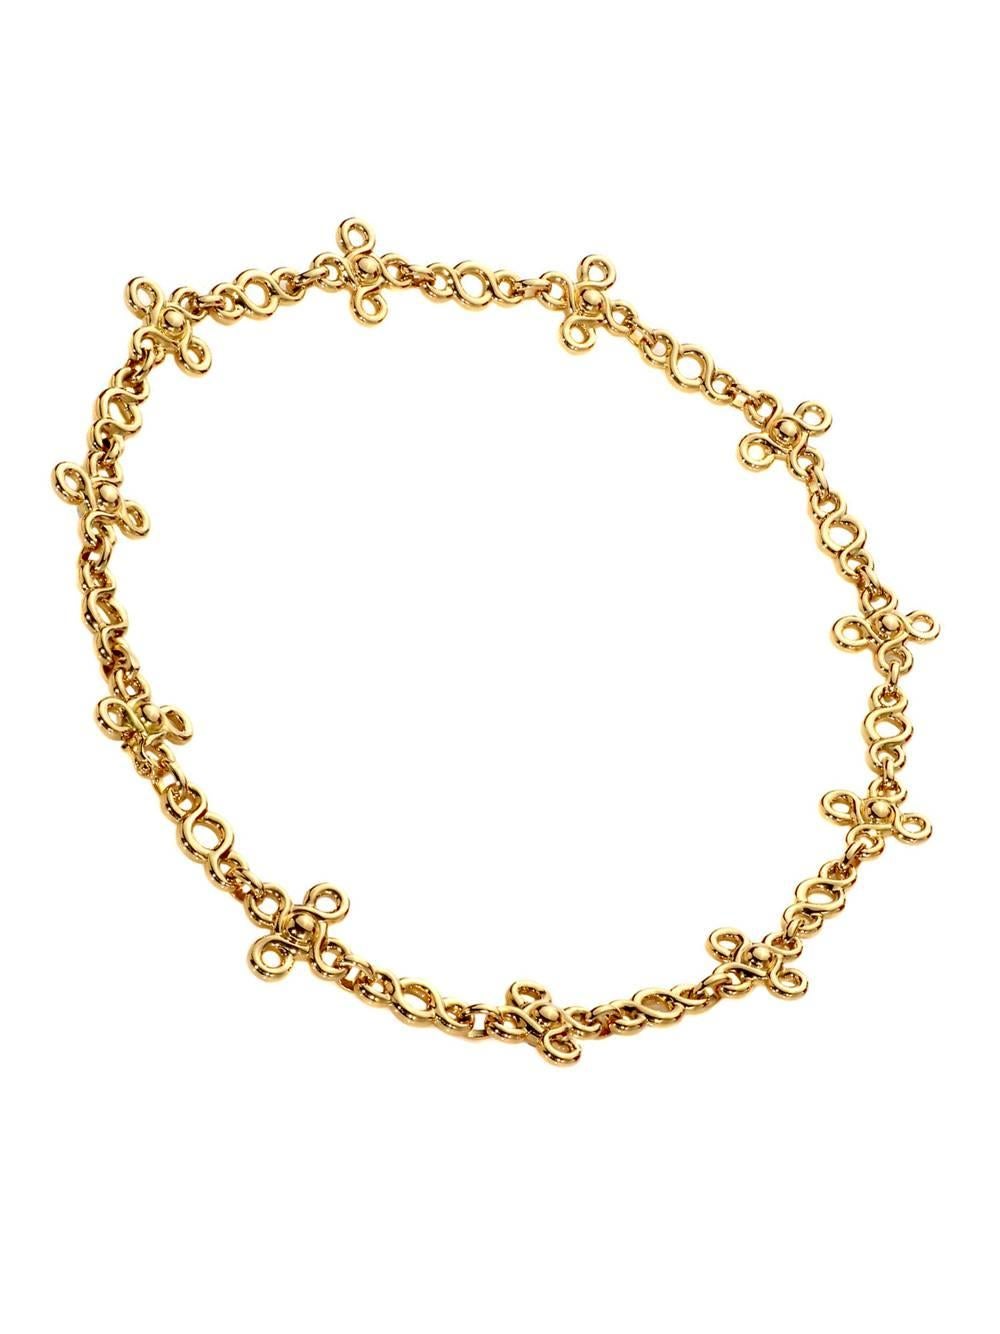 A fabulous authentic Chanel fine jewelry necklace featuring 11 natural cabochon gemstones set in 18k yellow gold.

Necklace Length: 16″
Necklace Dimensions:  .70" Wide

Inventory ID: 0000019